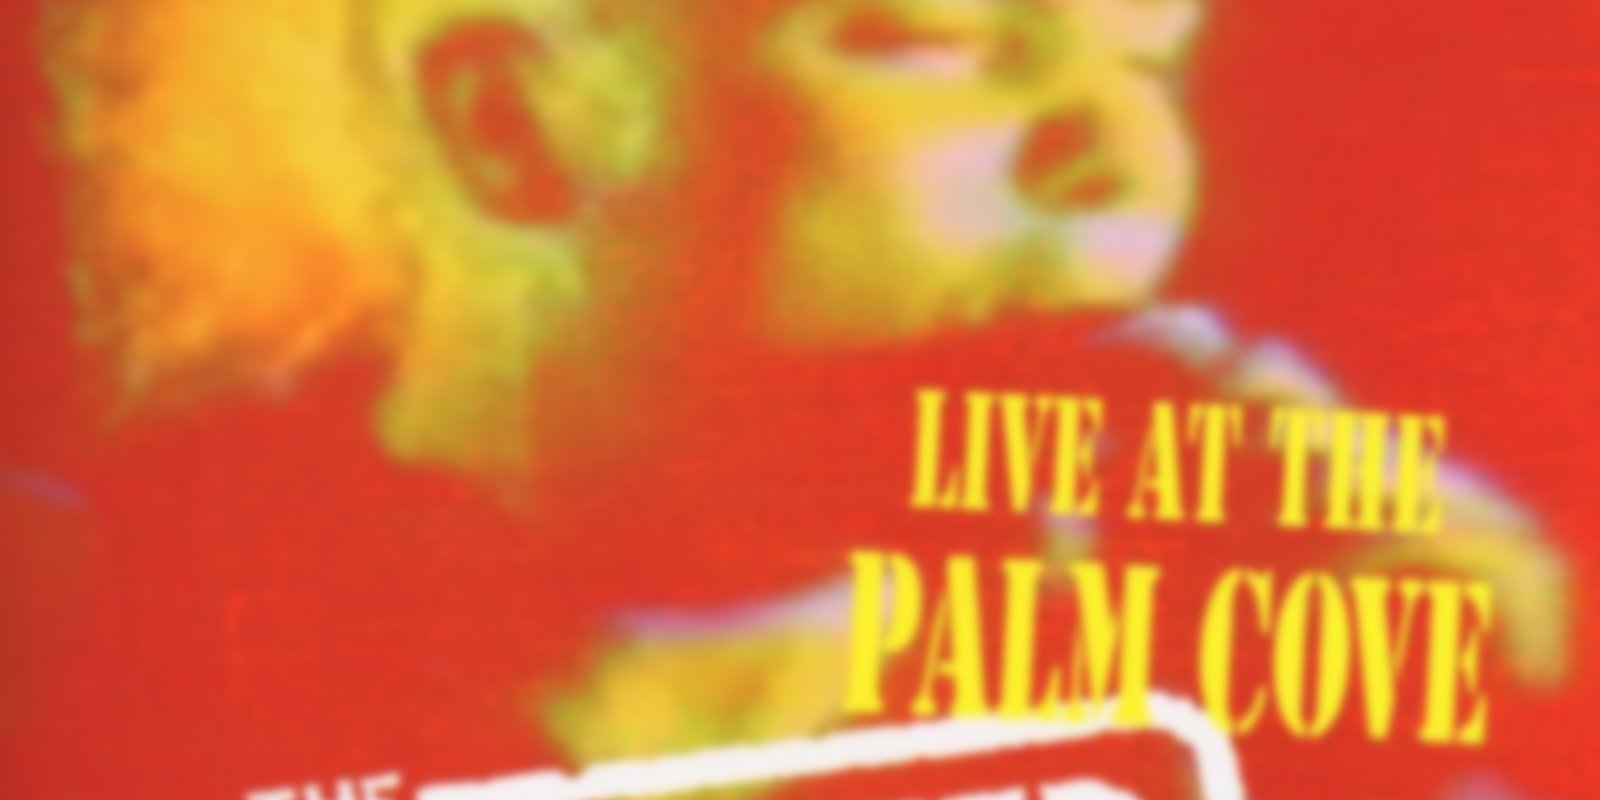 The Exploited - Live at the Palm Cove